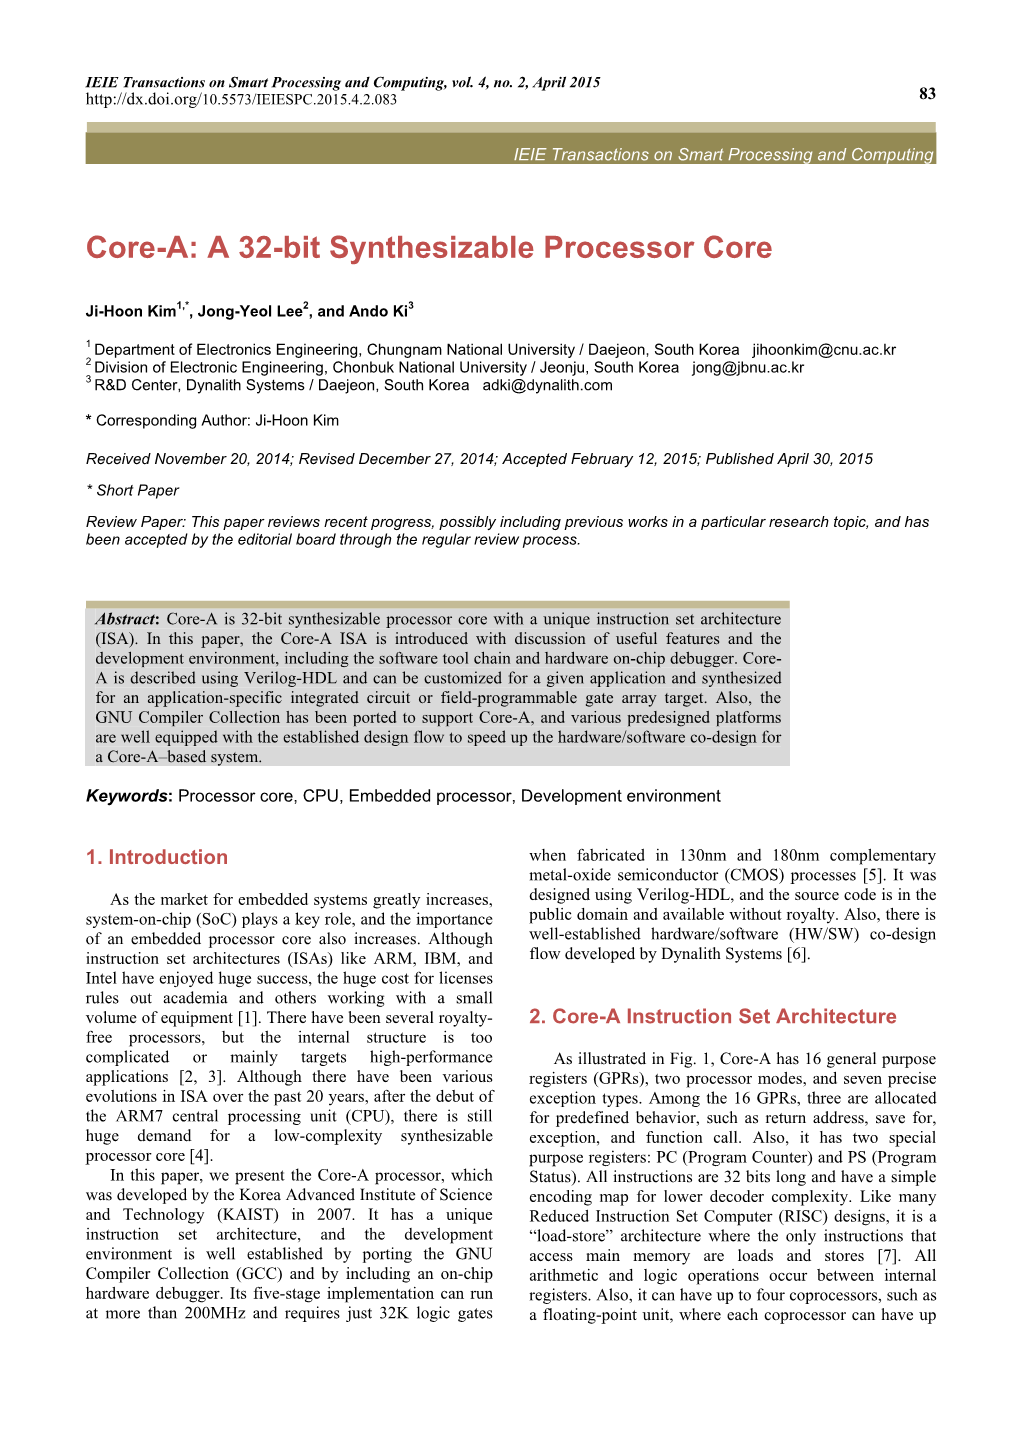 A 32-Bit Synthesizable Processor Core